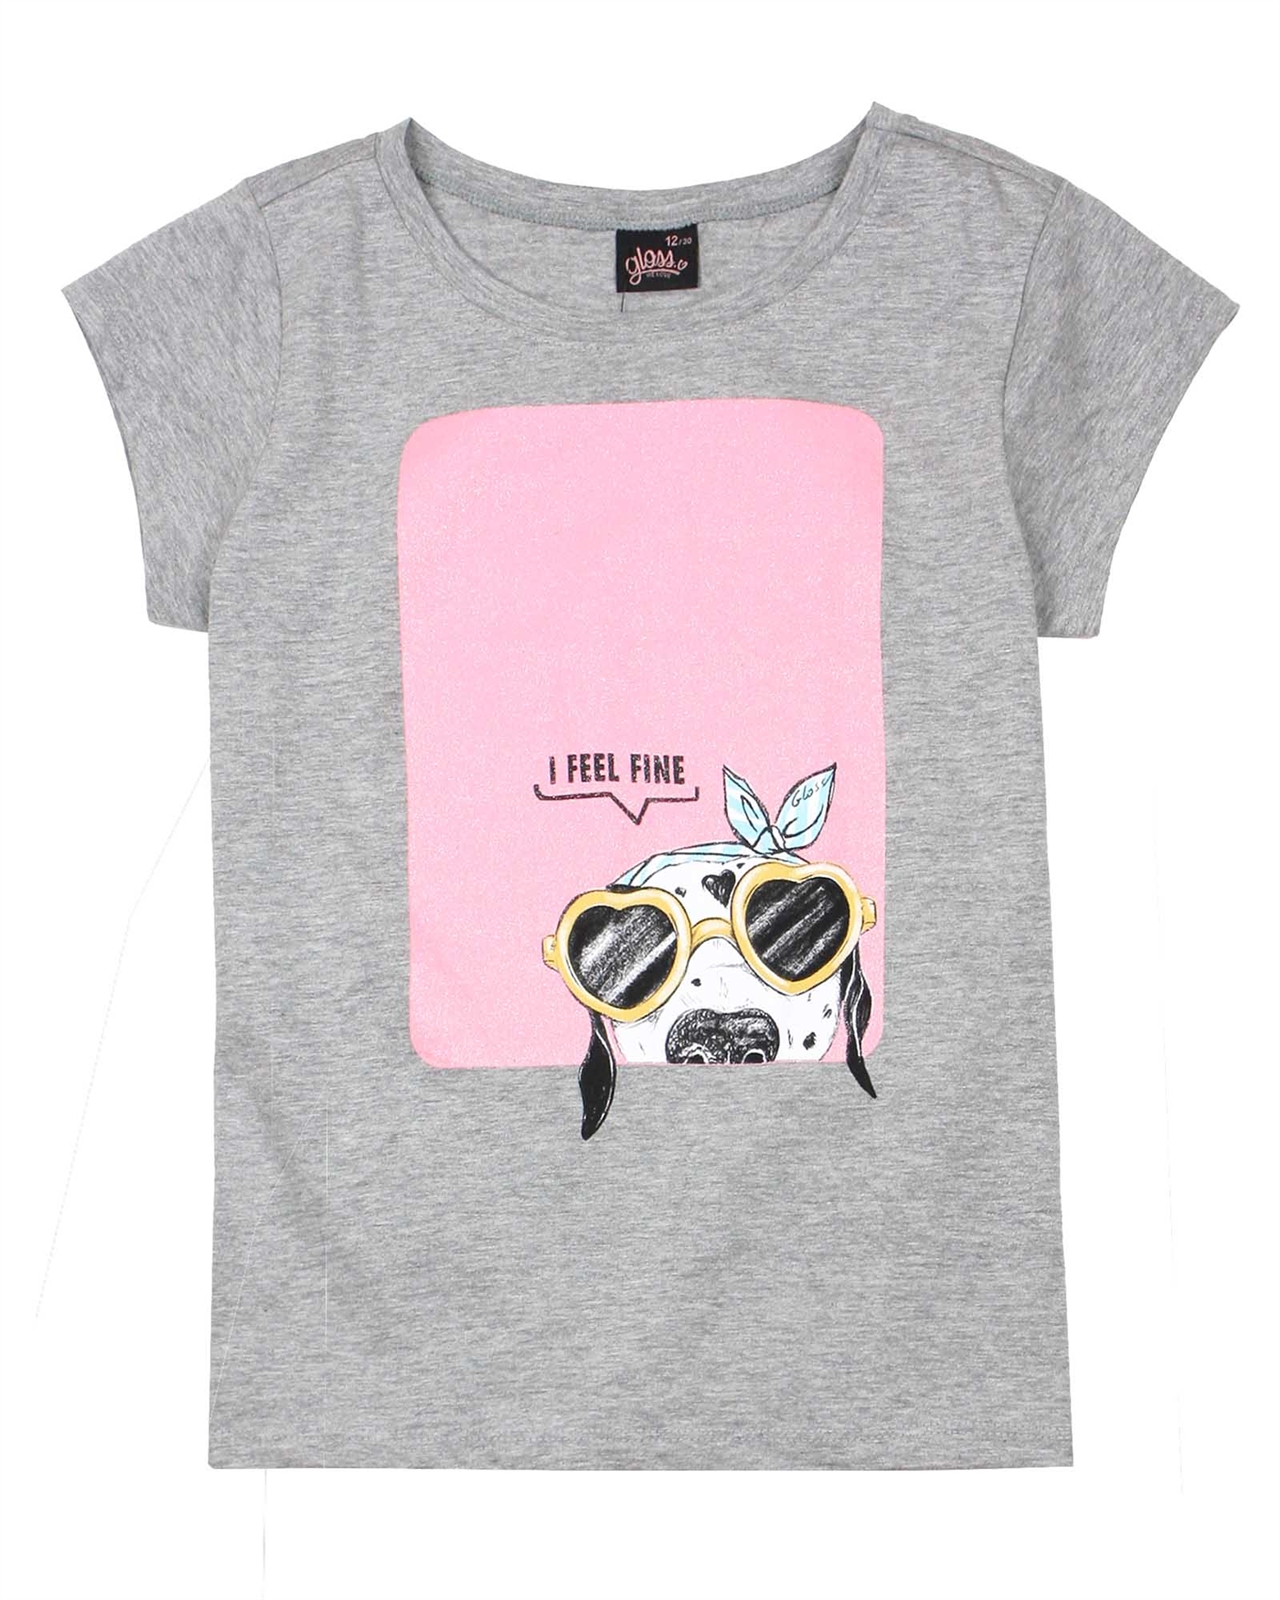 Gloss Junior Girl's T-shirt with Dog Print in Grey - We Love Gloss ...